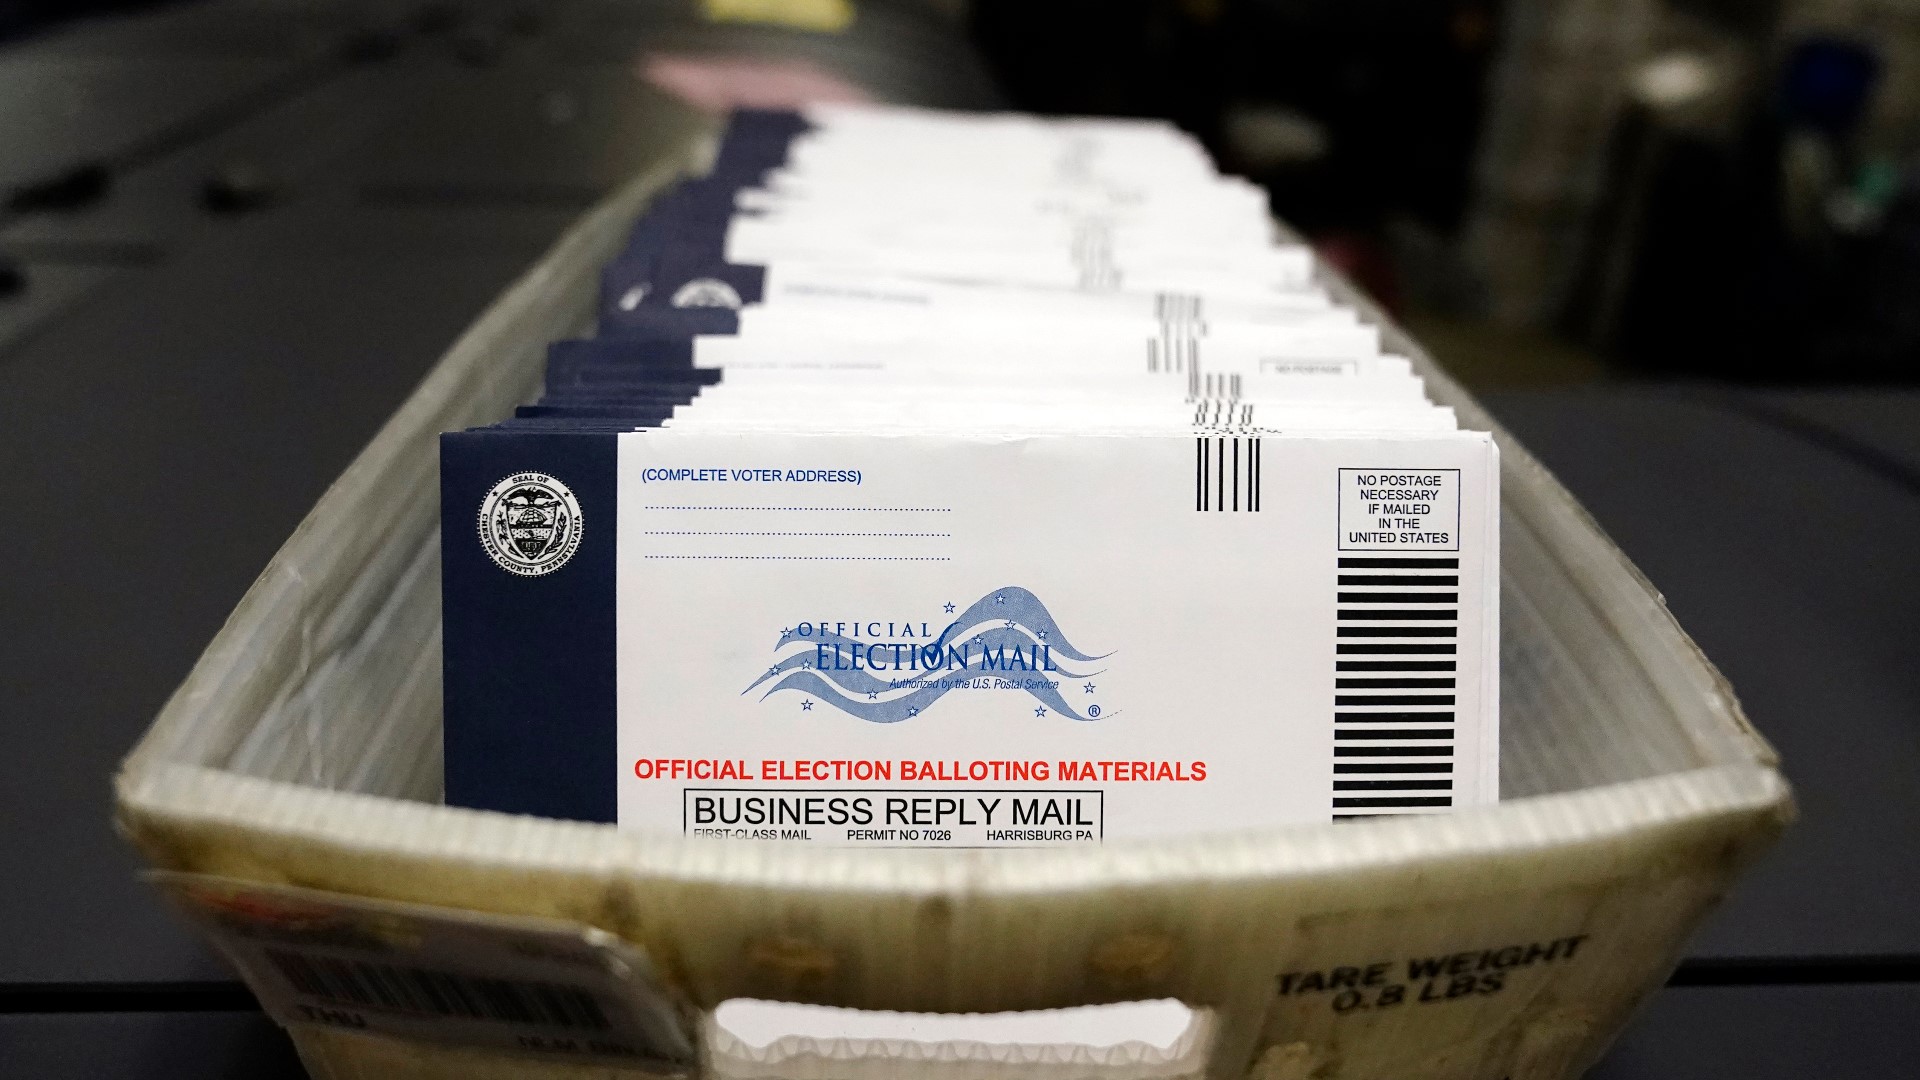 In 2020, the Wolf admin paid the postage bill to send ballots. This year, the admin says there's no money for that expense.